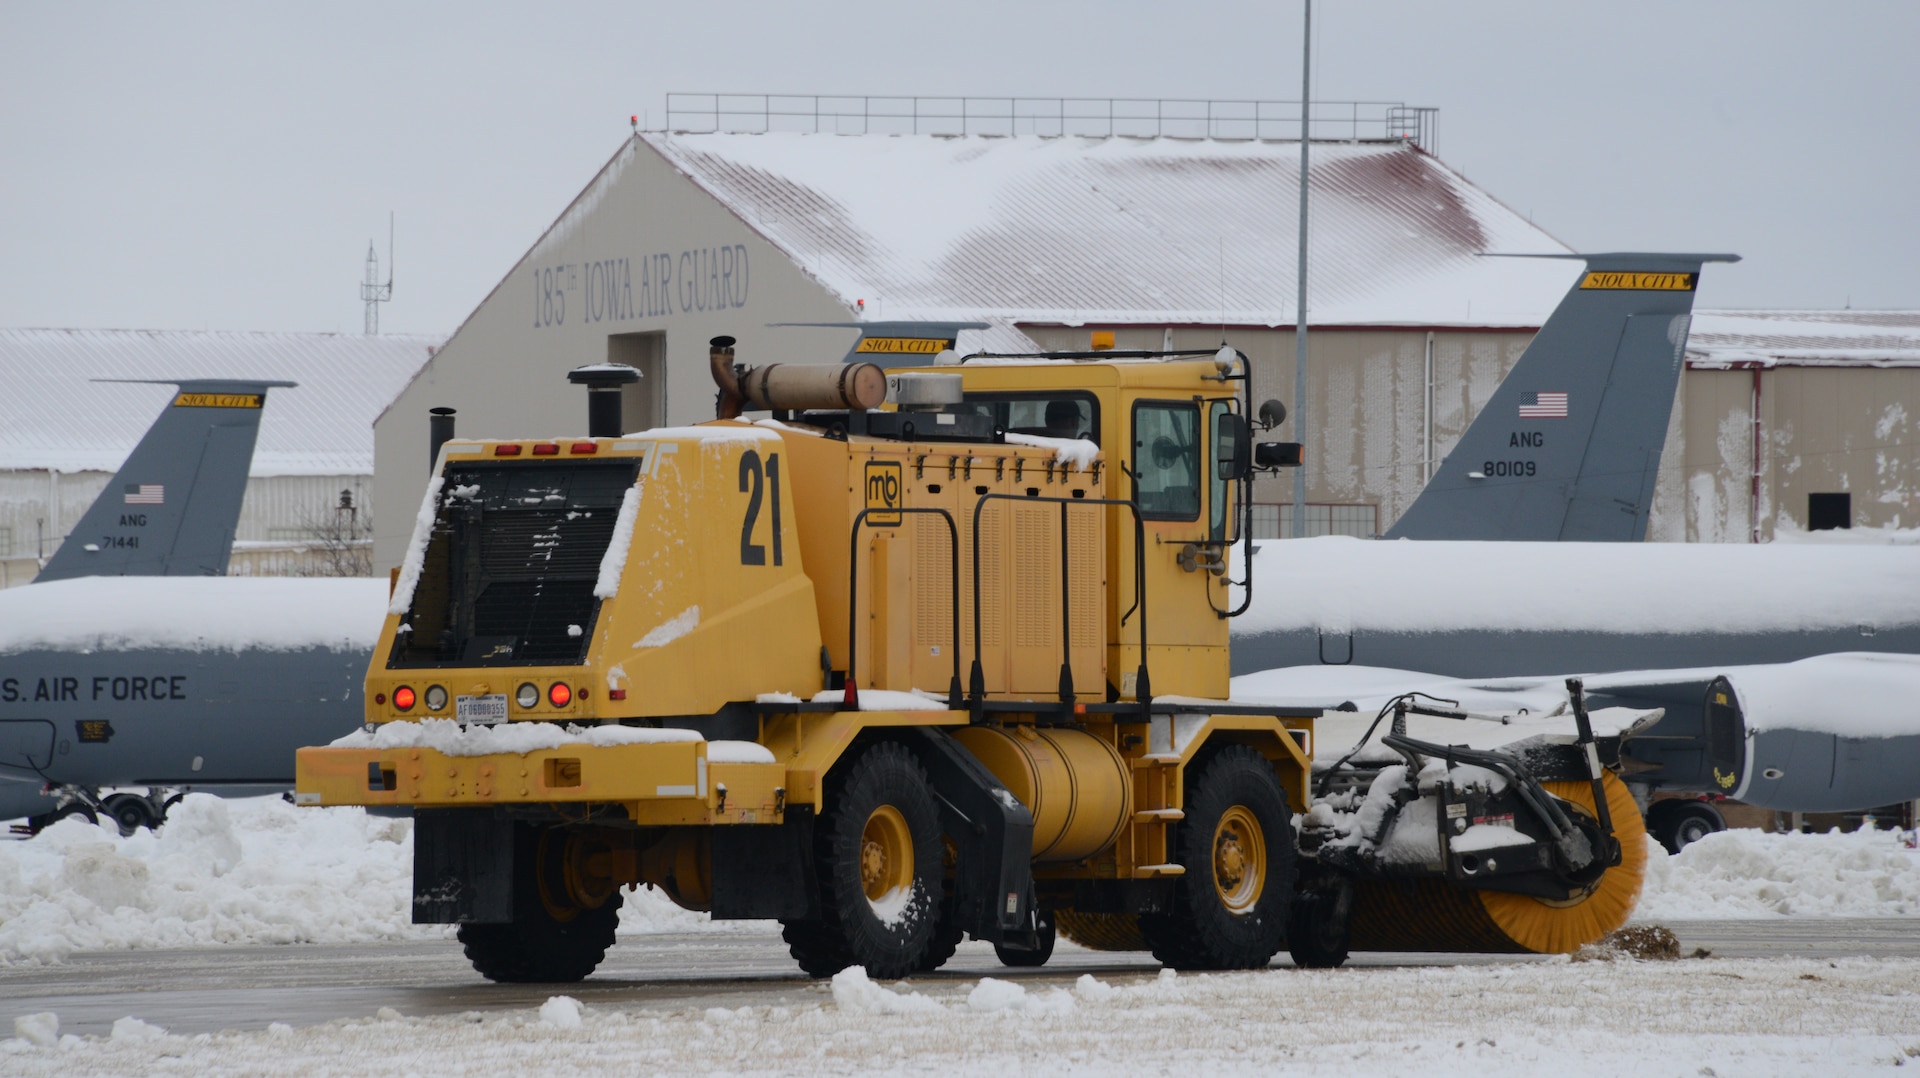 A member the 185th Air Refueling Wing snow removal team clears snow on the ramp area at the Sioux City, Iowa, base Air Guard unit on Nov. 27, 2019.